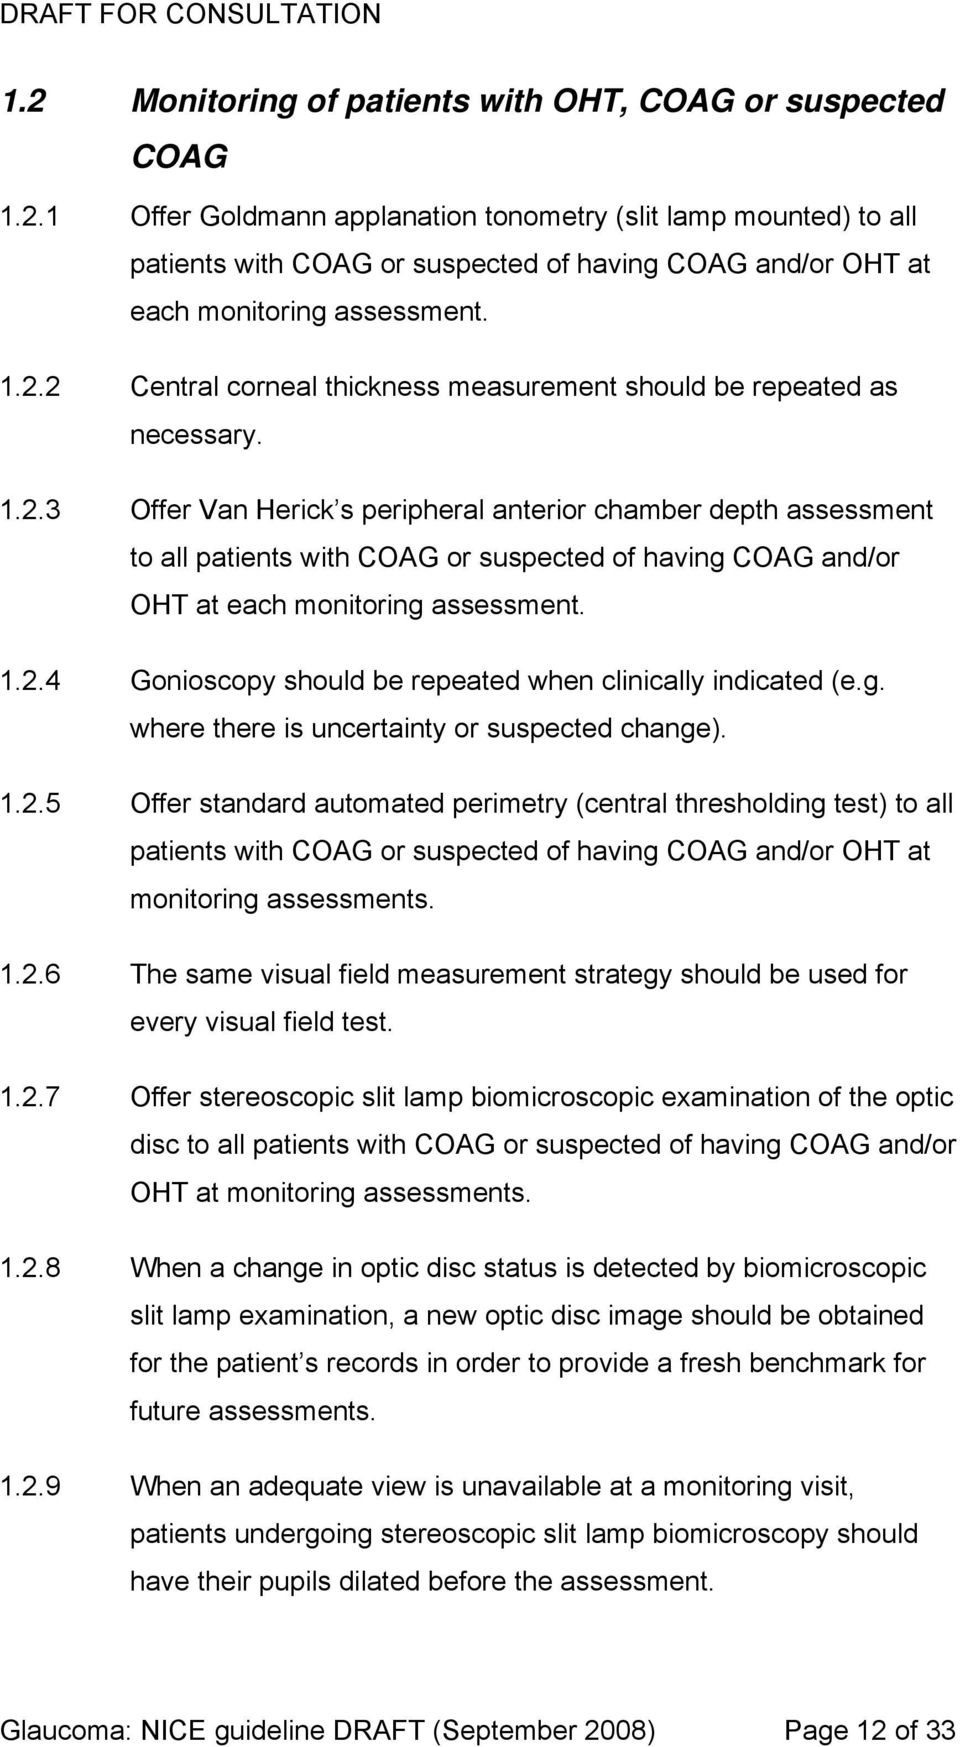 1.2.4 Gonioscopy should be repeated when clinically indicated (e.g. where there is uncertainty or suspected change). 1.2.5 Offer standard automated perimetry (central thresholding test) to all patients with COAG or suspected of having COAG and/or OHT at monitoring assessments.